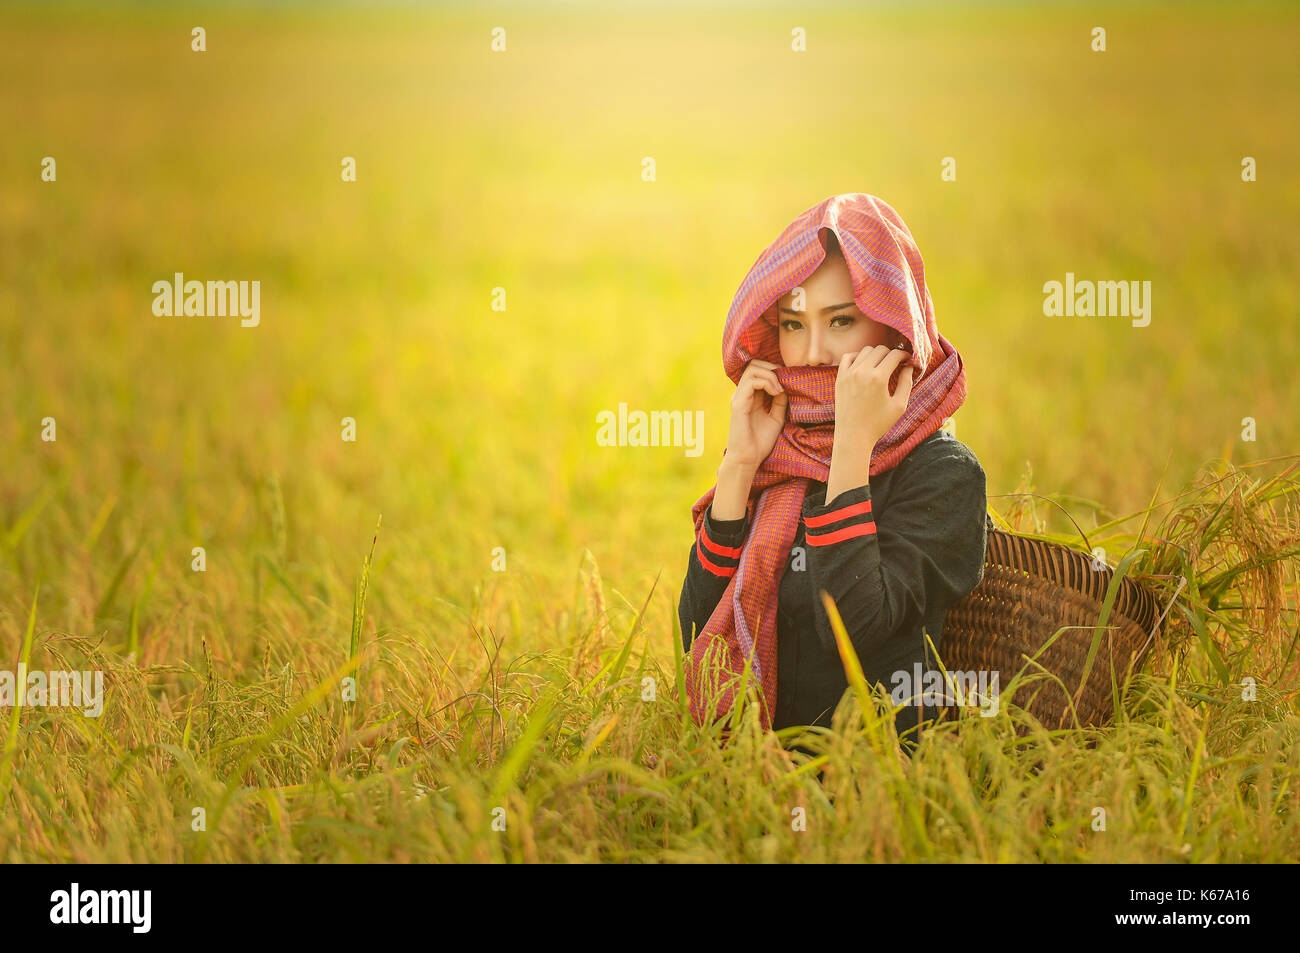 Portrait of a woman standing in a field, Thailand Stock Photo